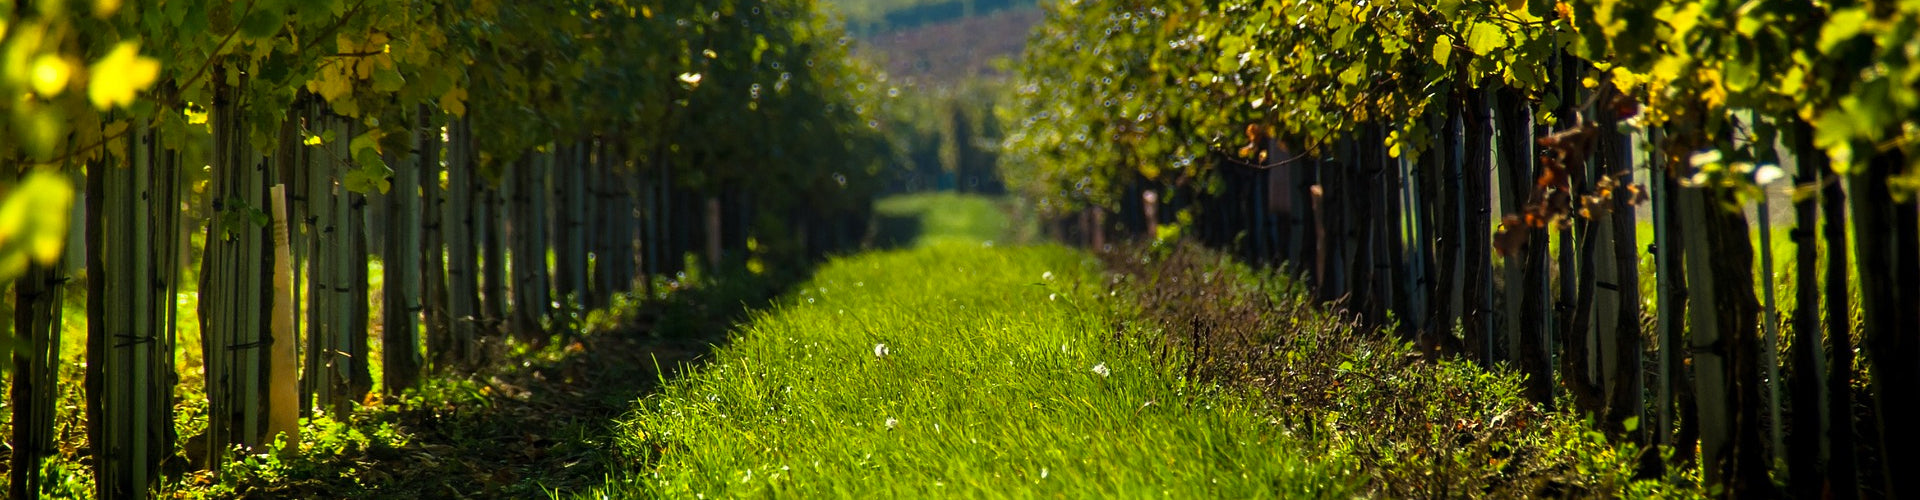 Organic Vineyards and Crop Cover